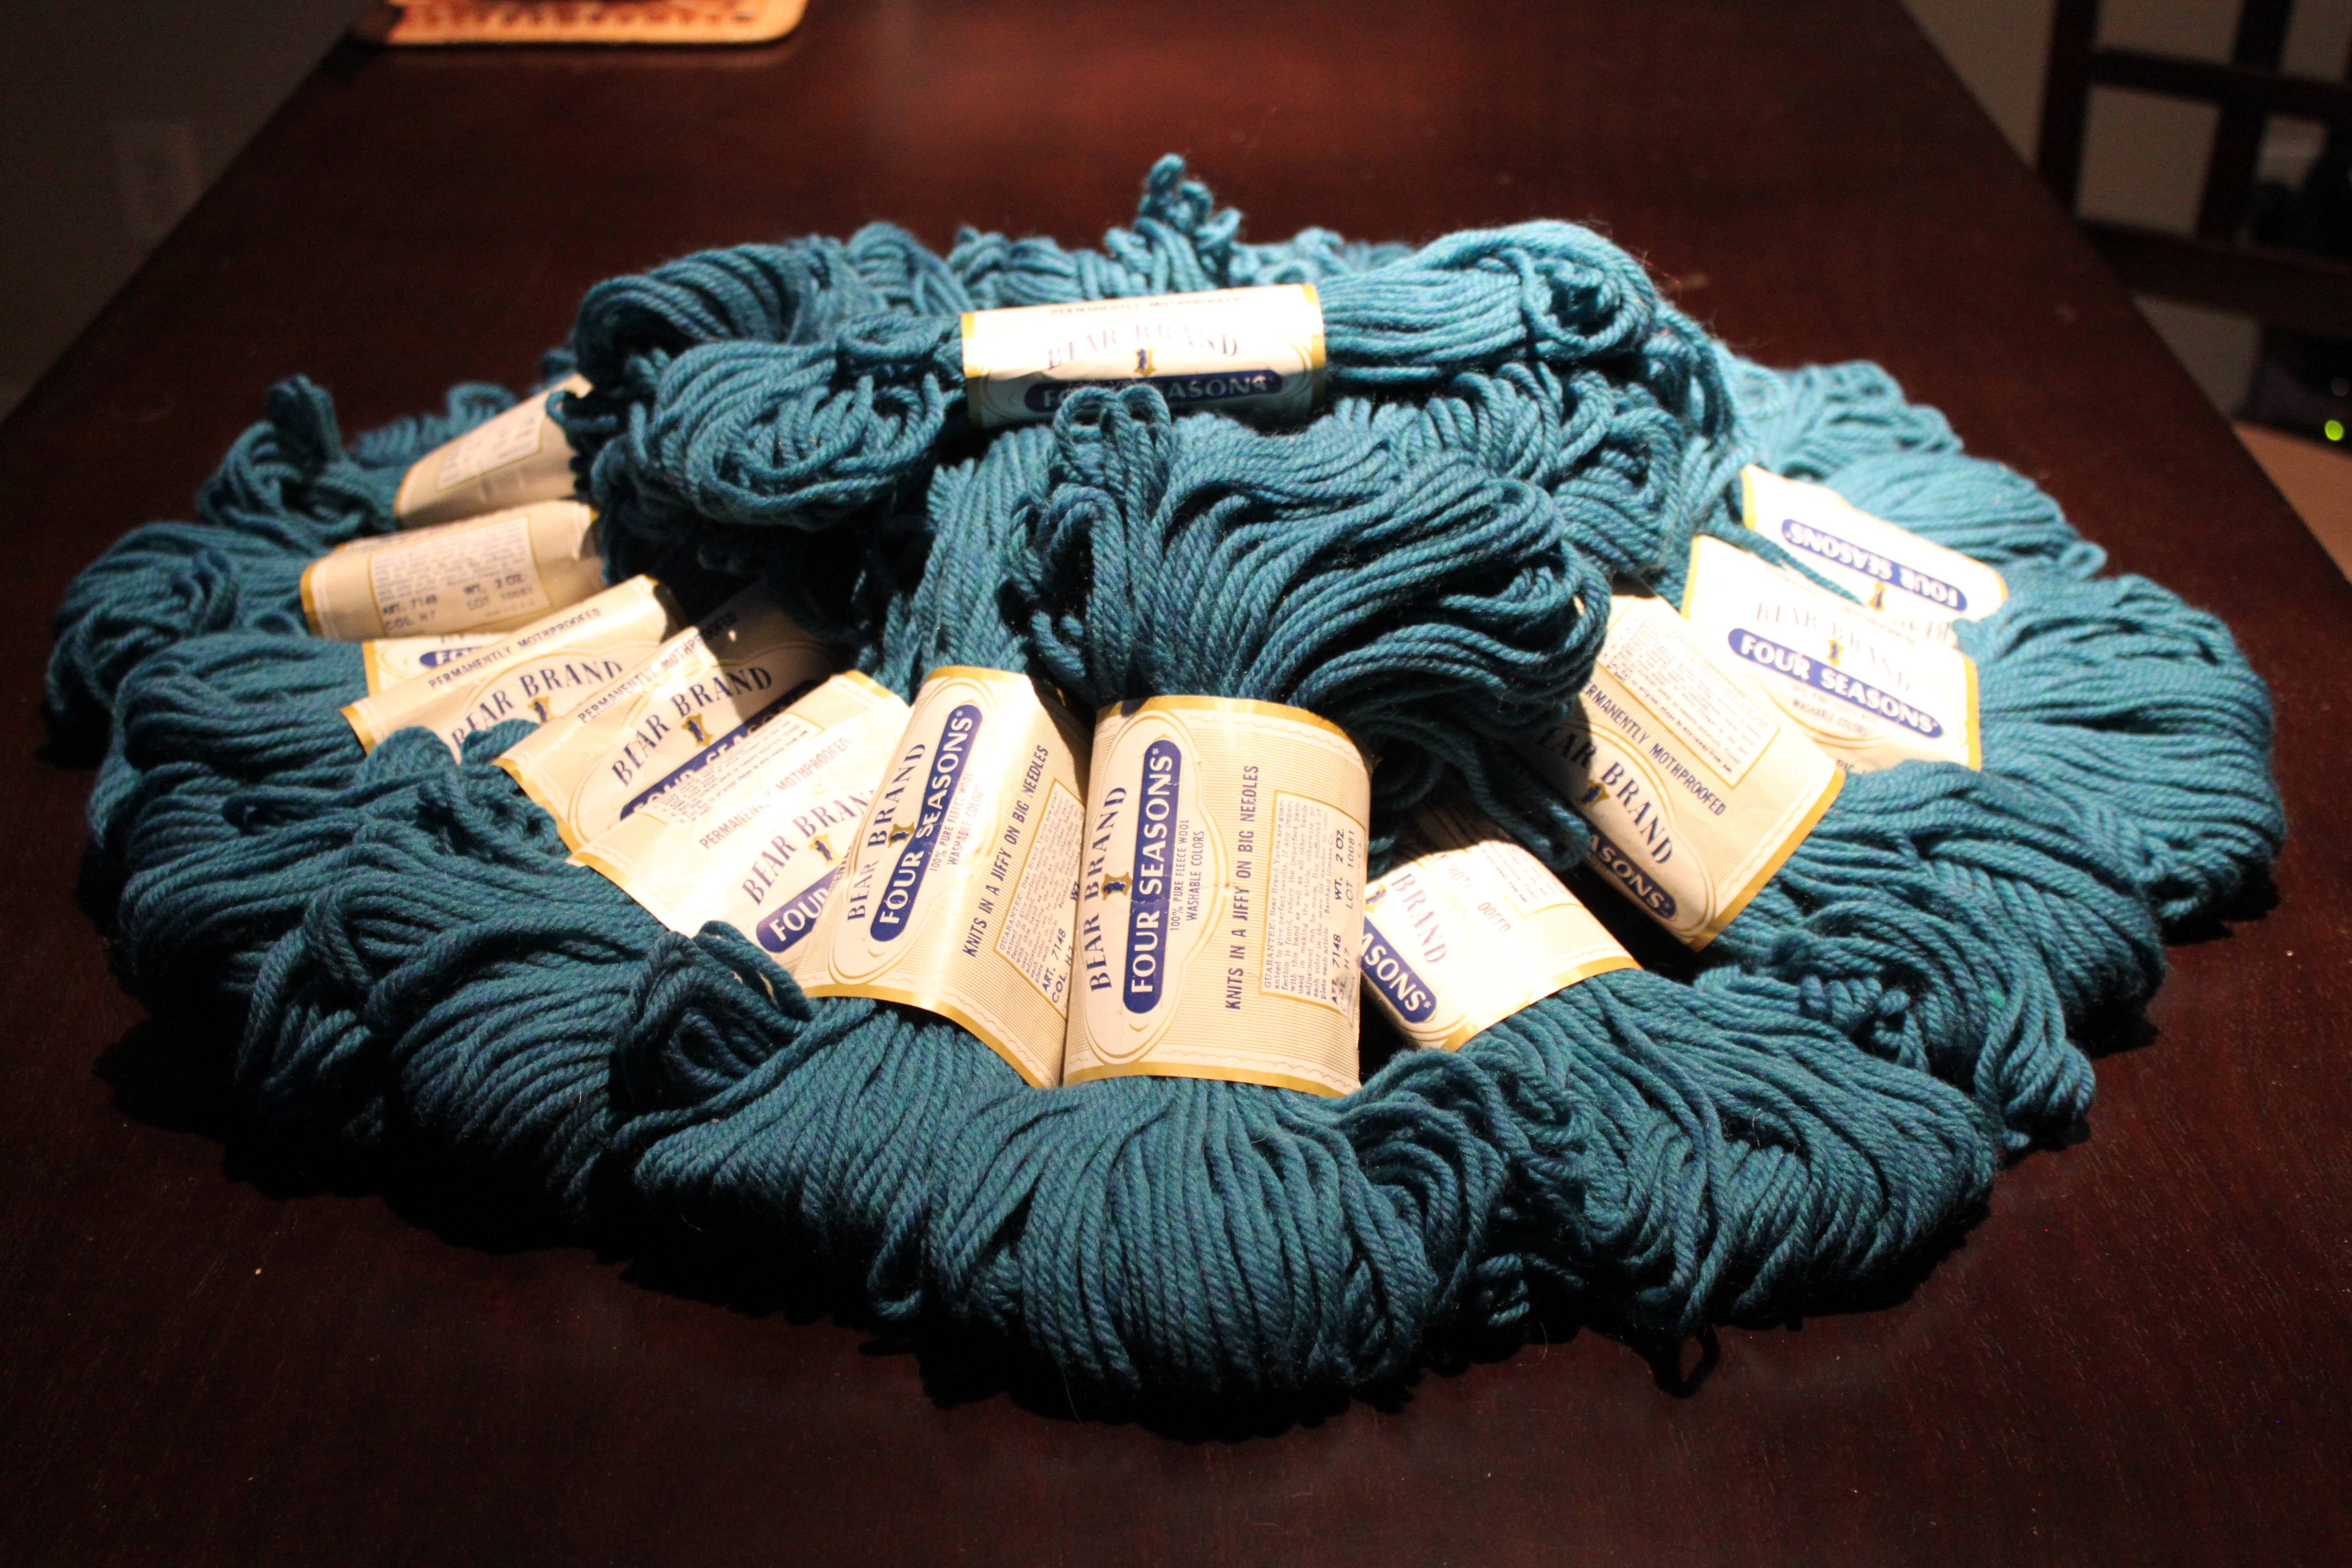 How to Twist a Hank / Skein of Hand-Dyed Yarn! - Expression Fiber Arts